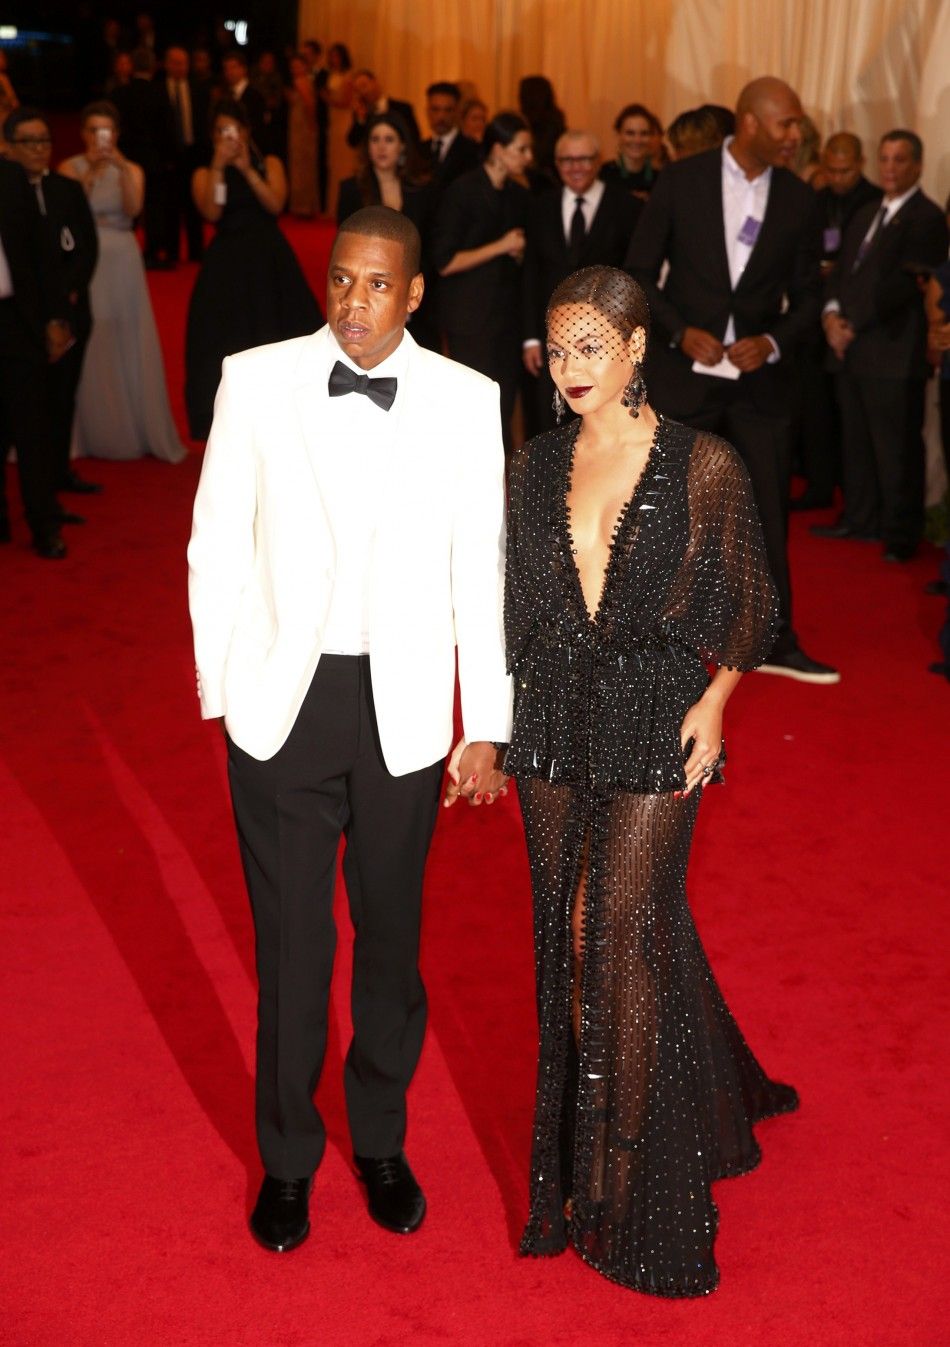 Jay Z and Beyonce at the MET Gala 